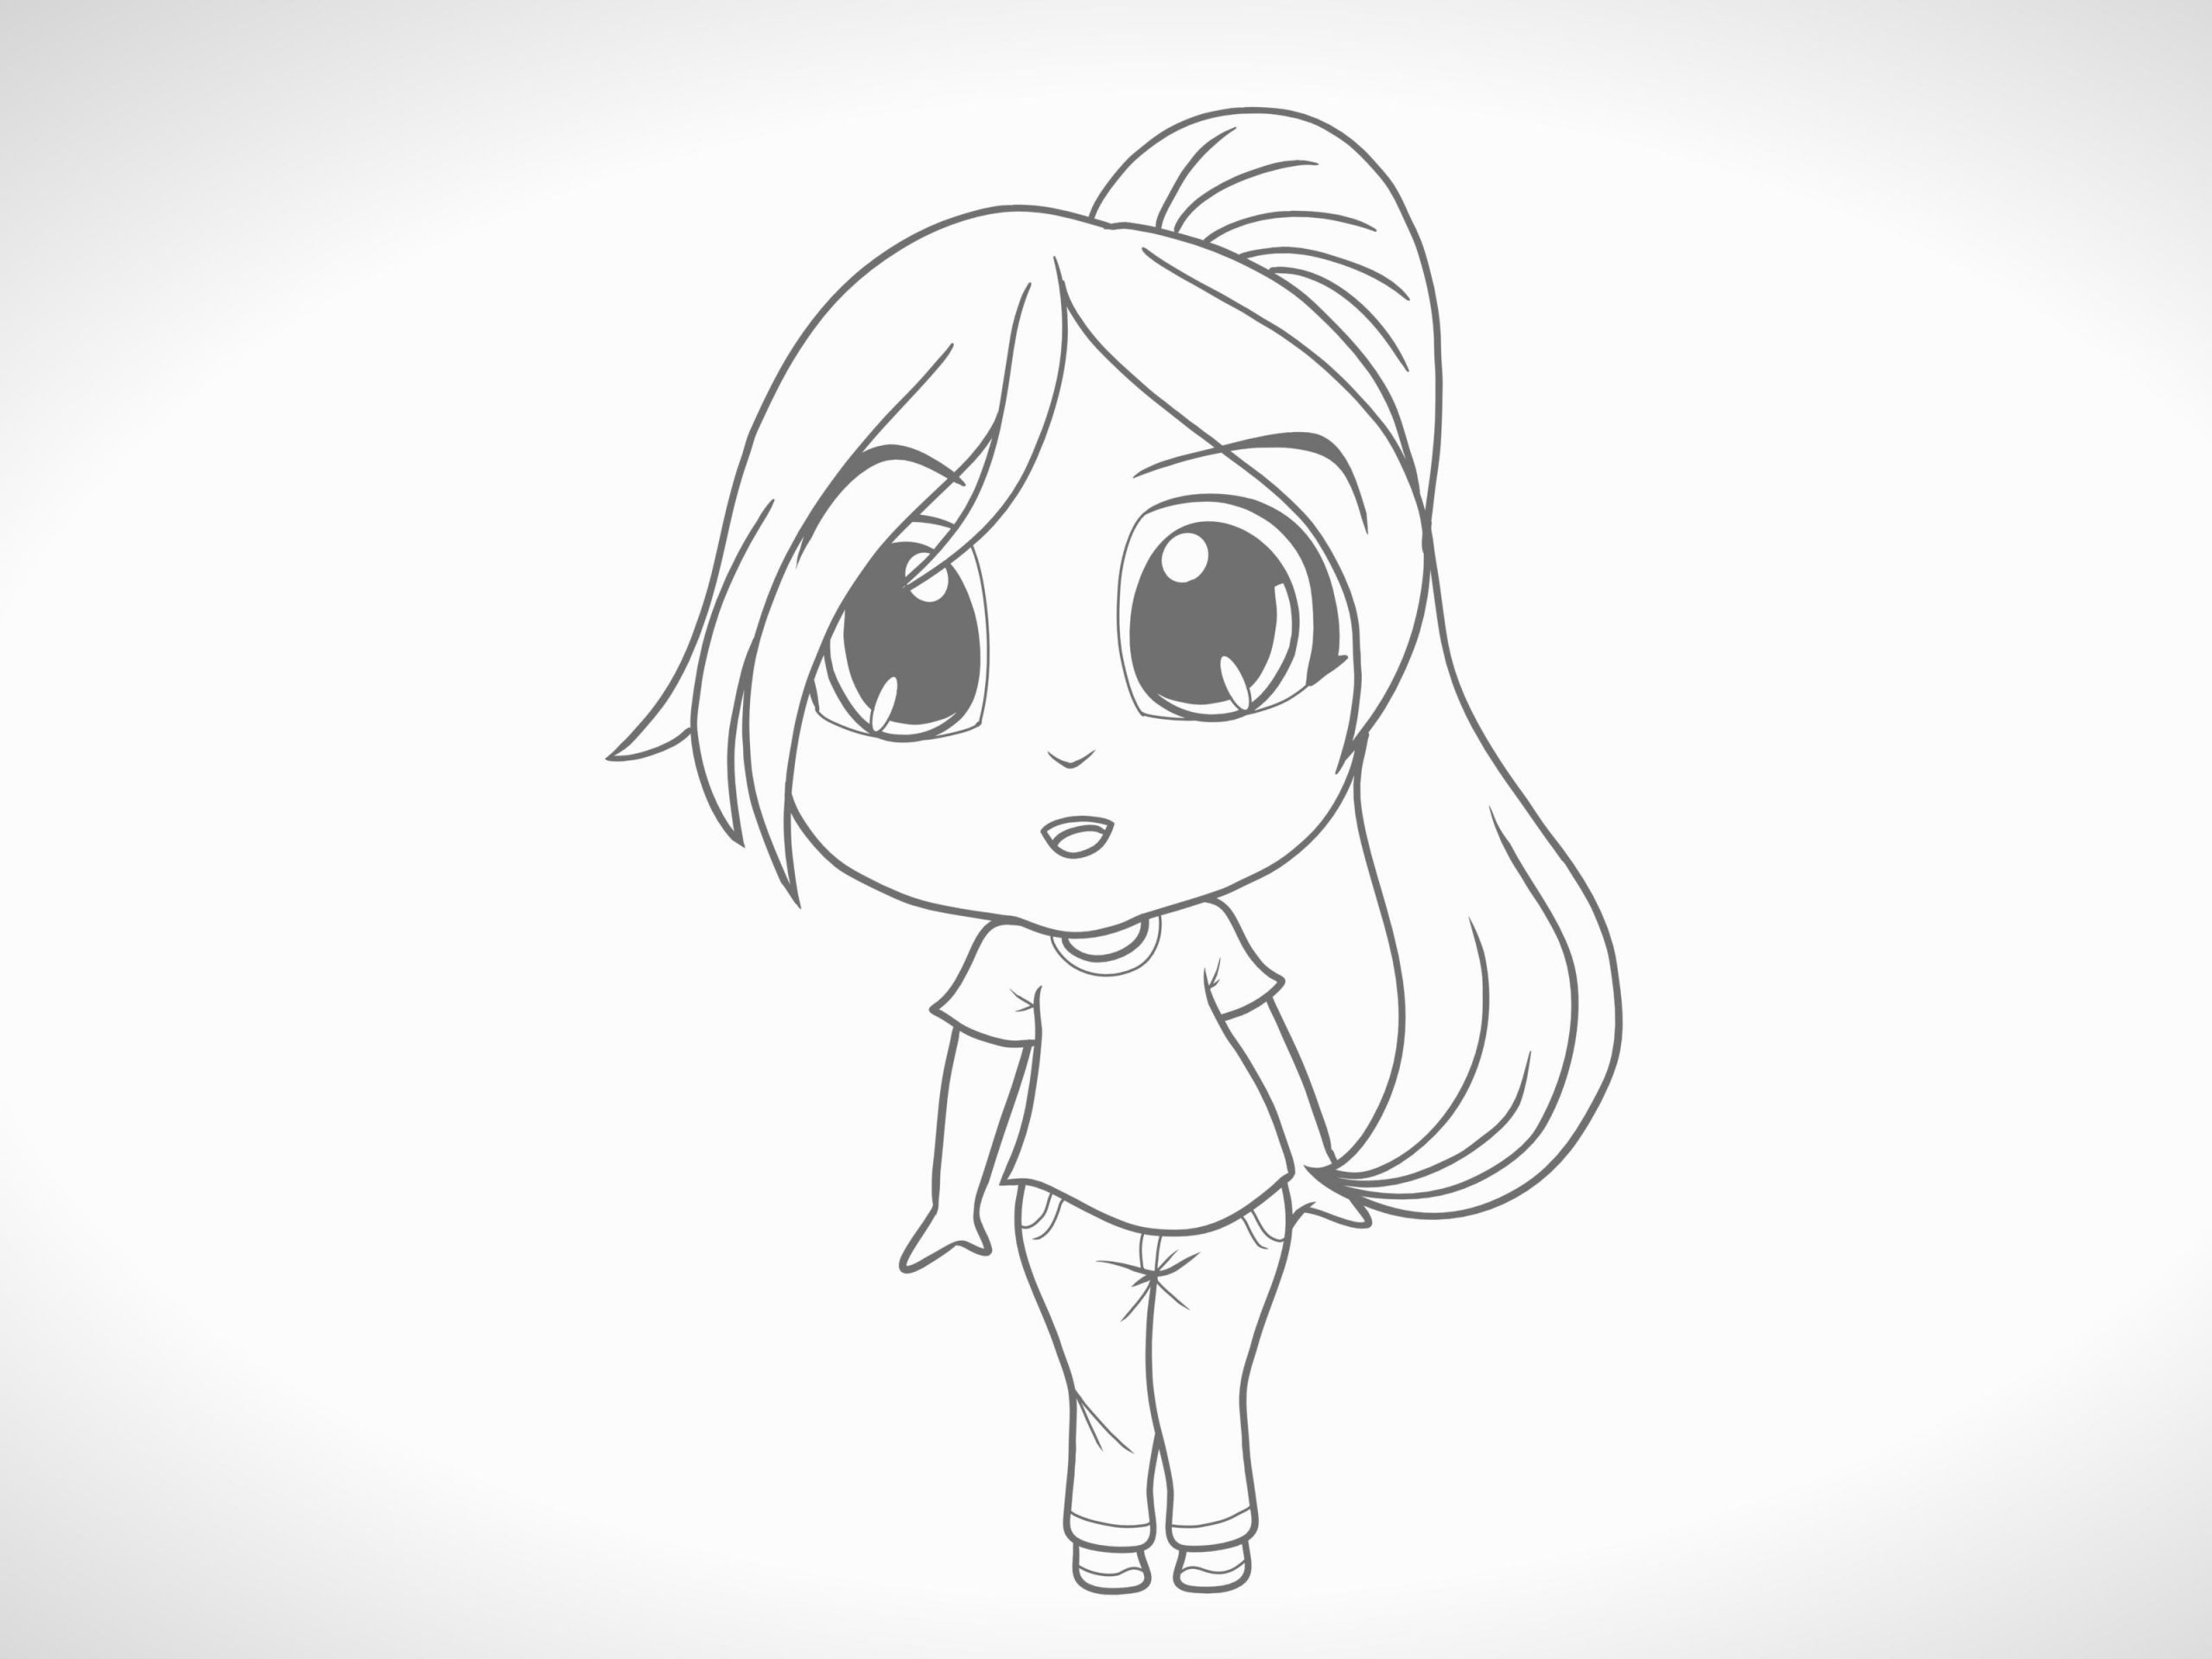 Easiest Anime Characters to Draw How to Draw A Chibi Character 12 Steps with Pictures